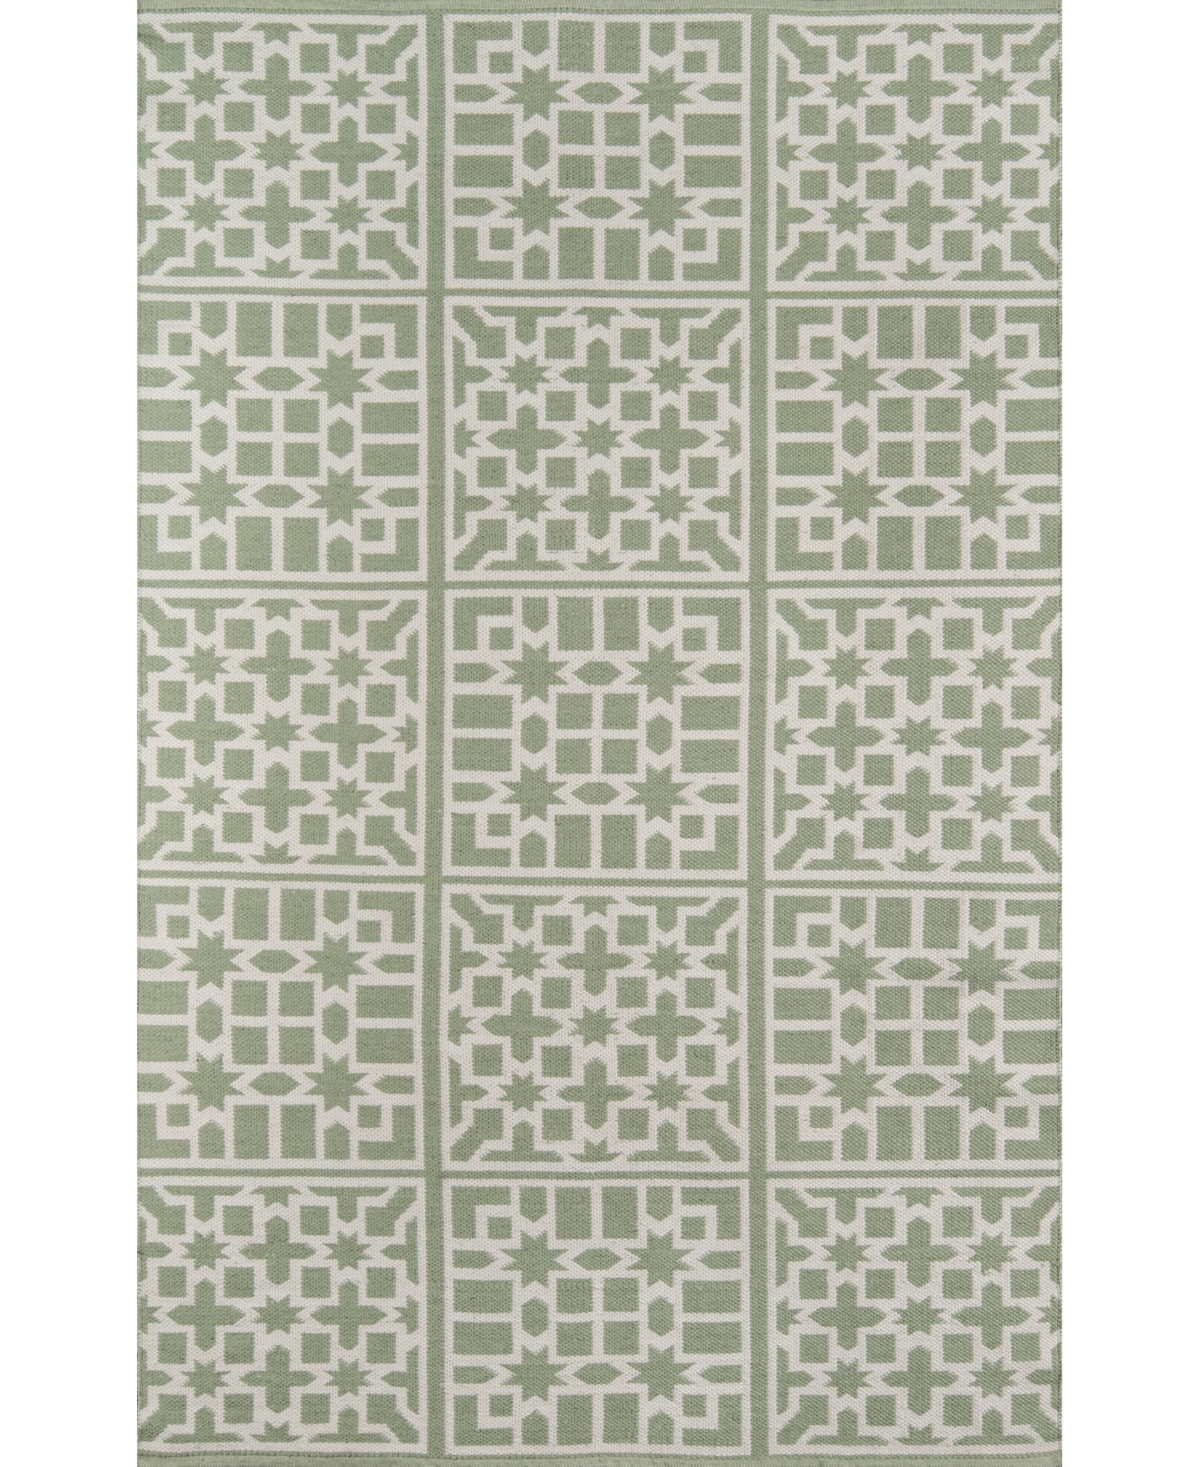 MADCAP COTTAGE PALM BEACH LAKE TRAIL GREEN 3'6" X 5'6" INDOOR/OUTDOOR AREA RUG